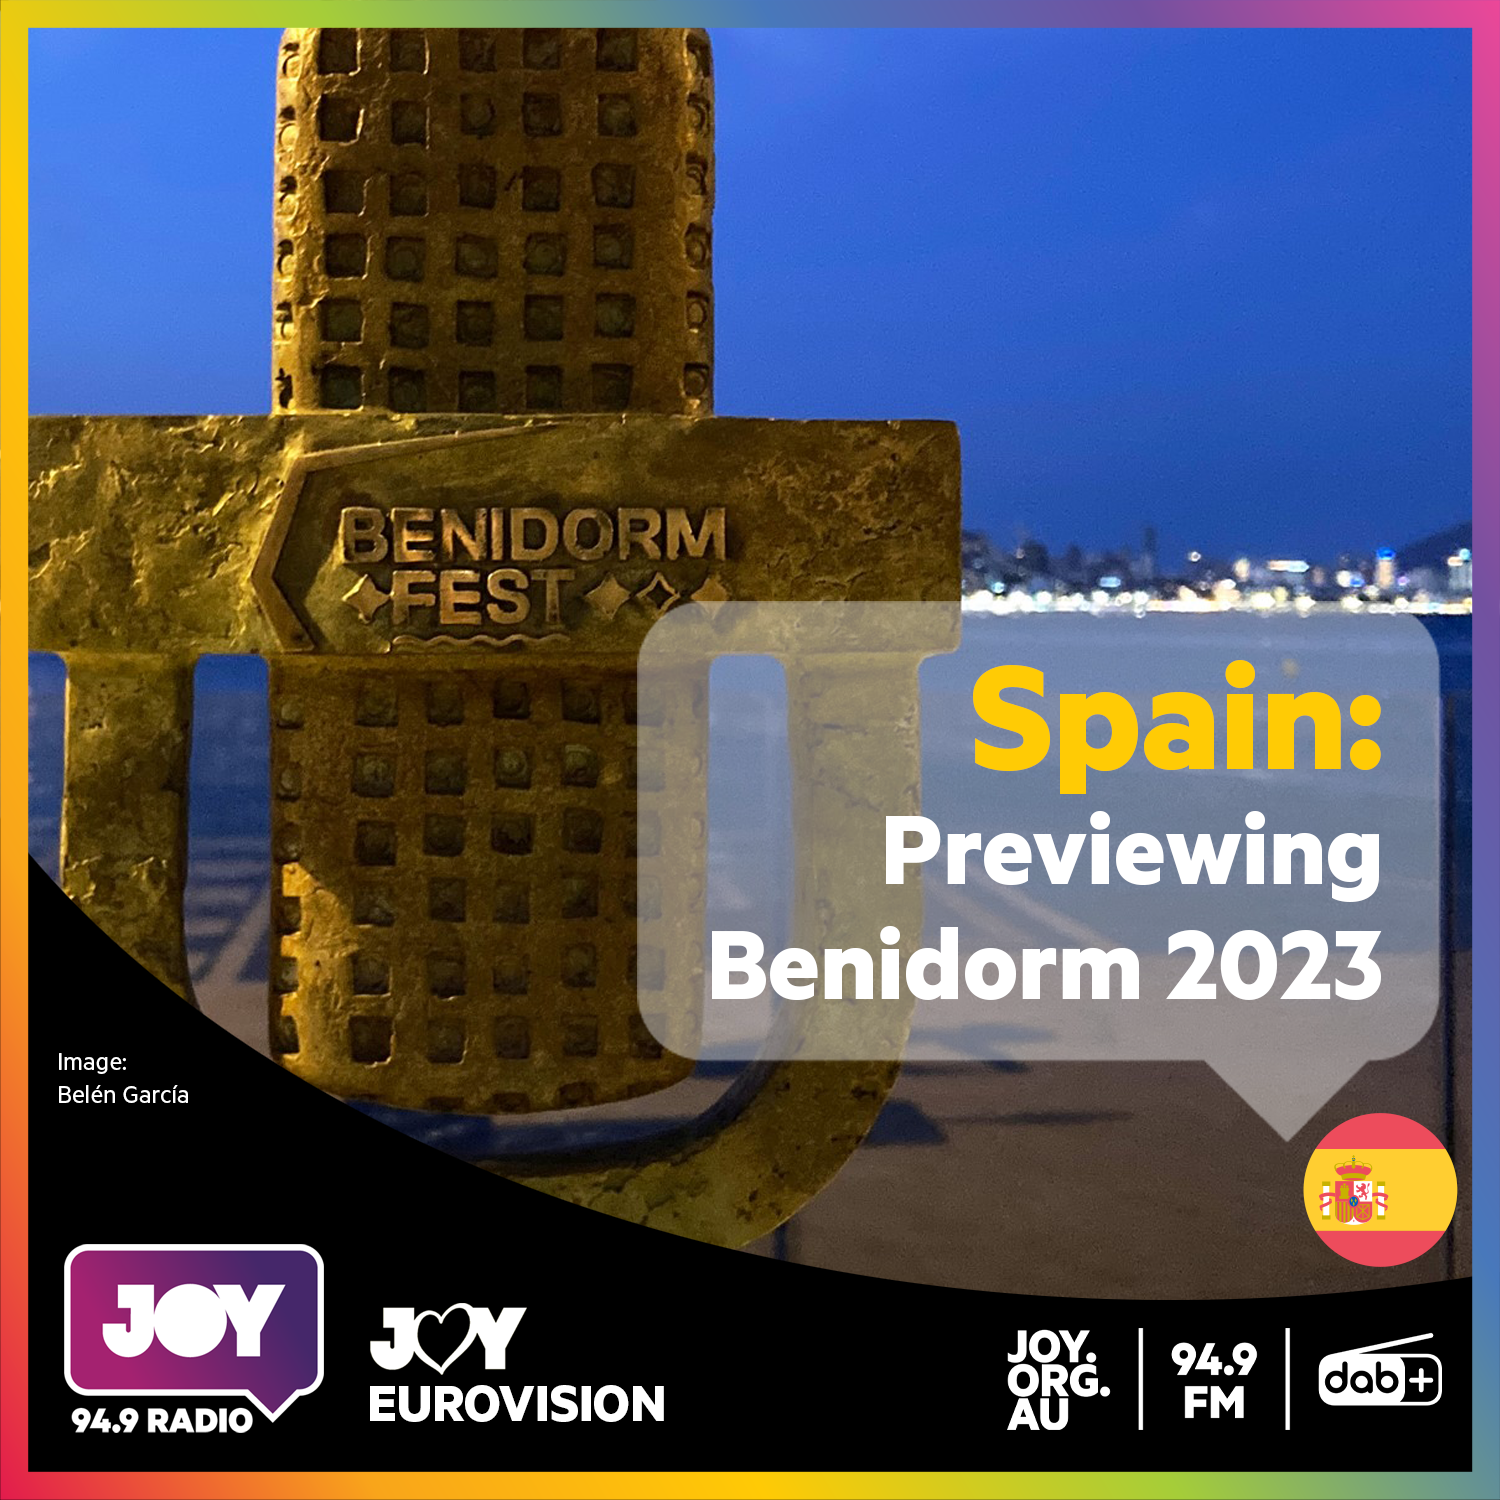 🇪🇸 Previewing Benidorm Fest 2023: Spain’s not going slow